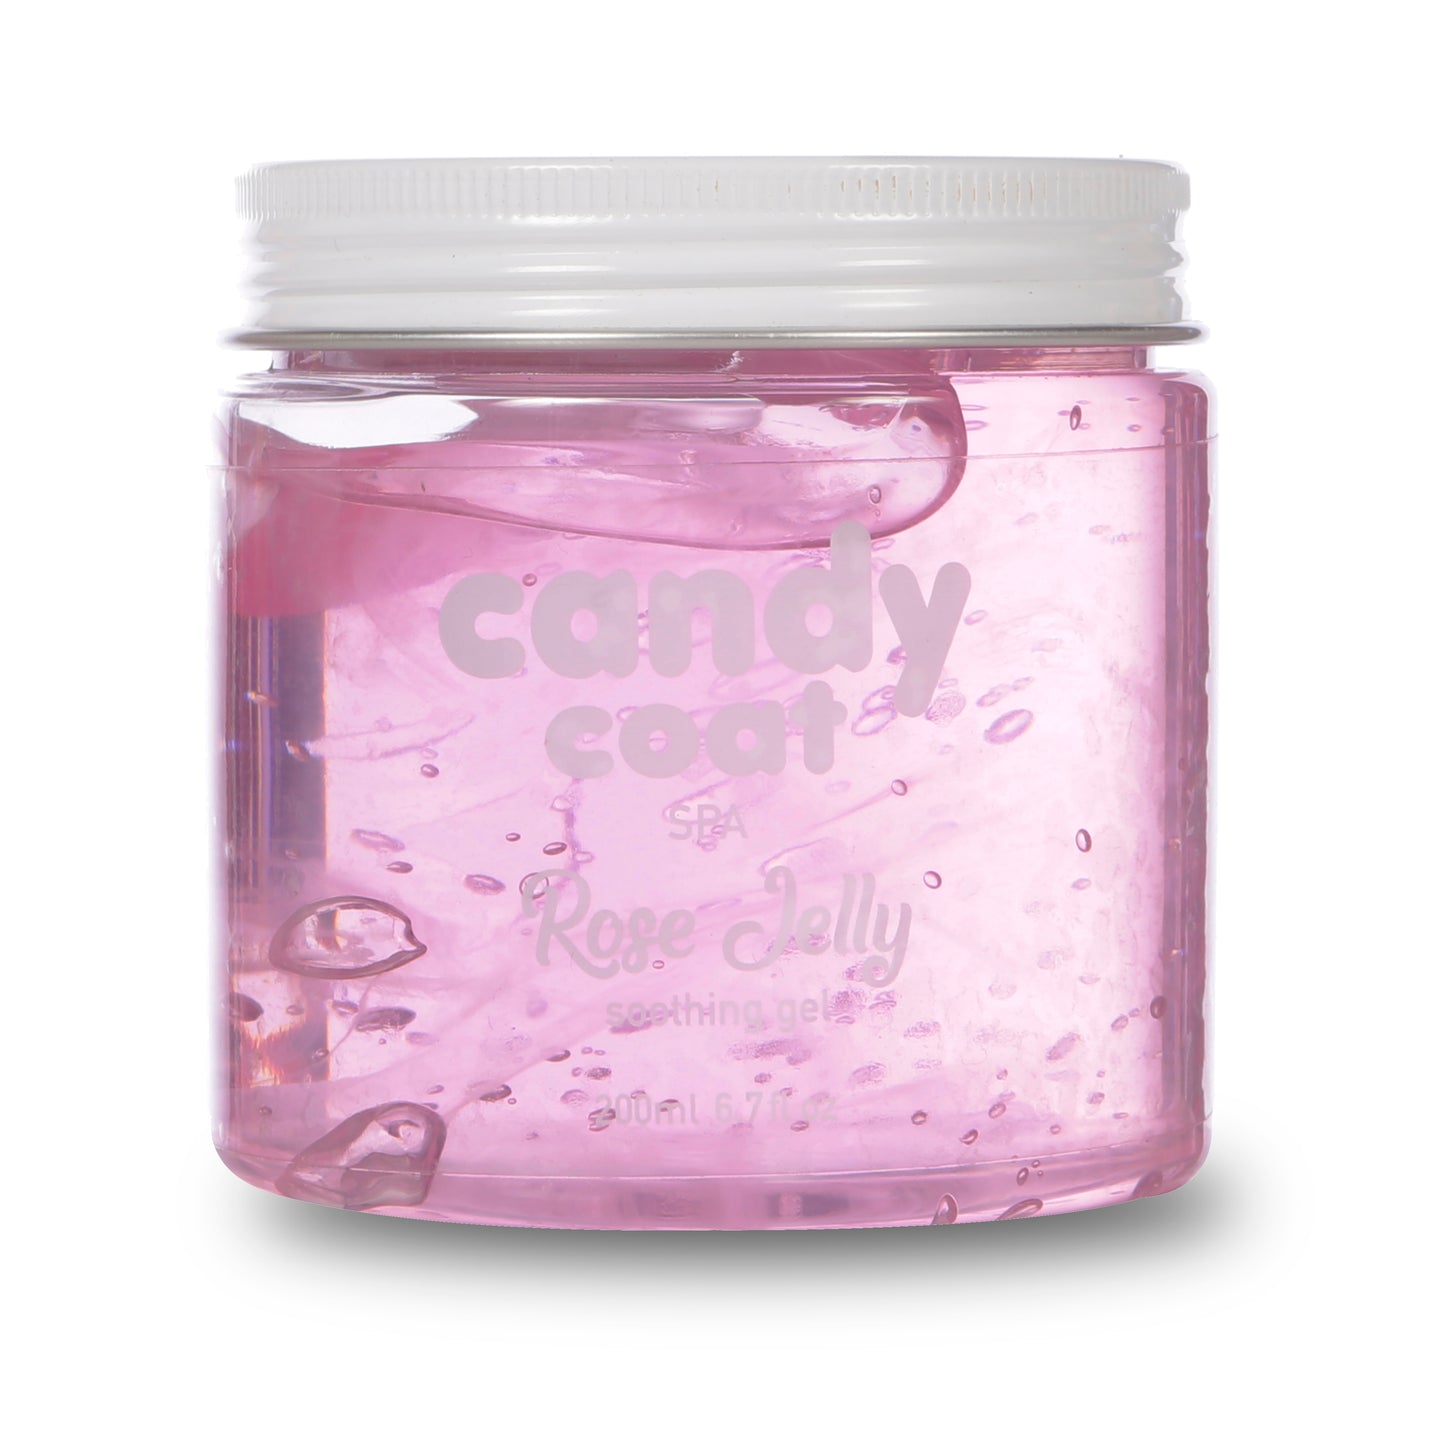 Candy Coat - Rose Jelly Soothing Gel - Candy Coat